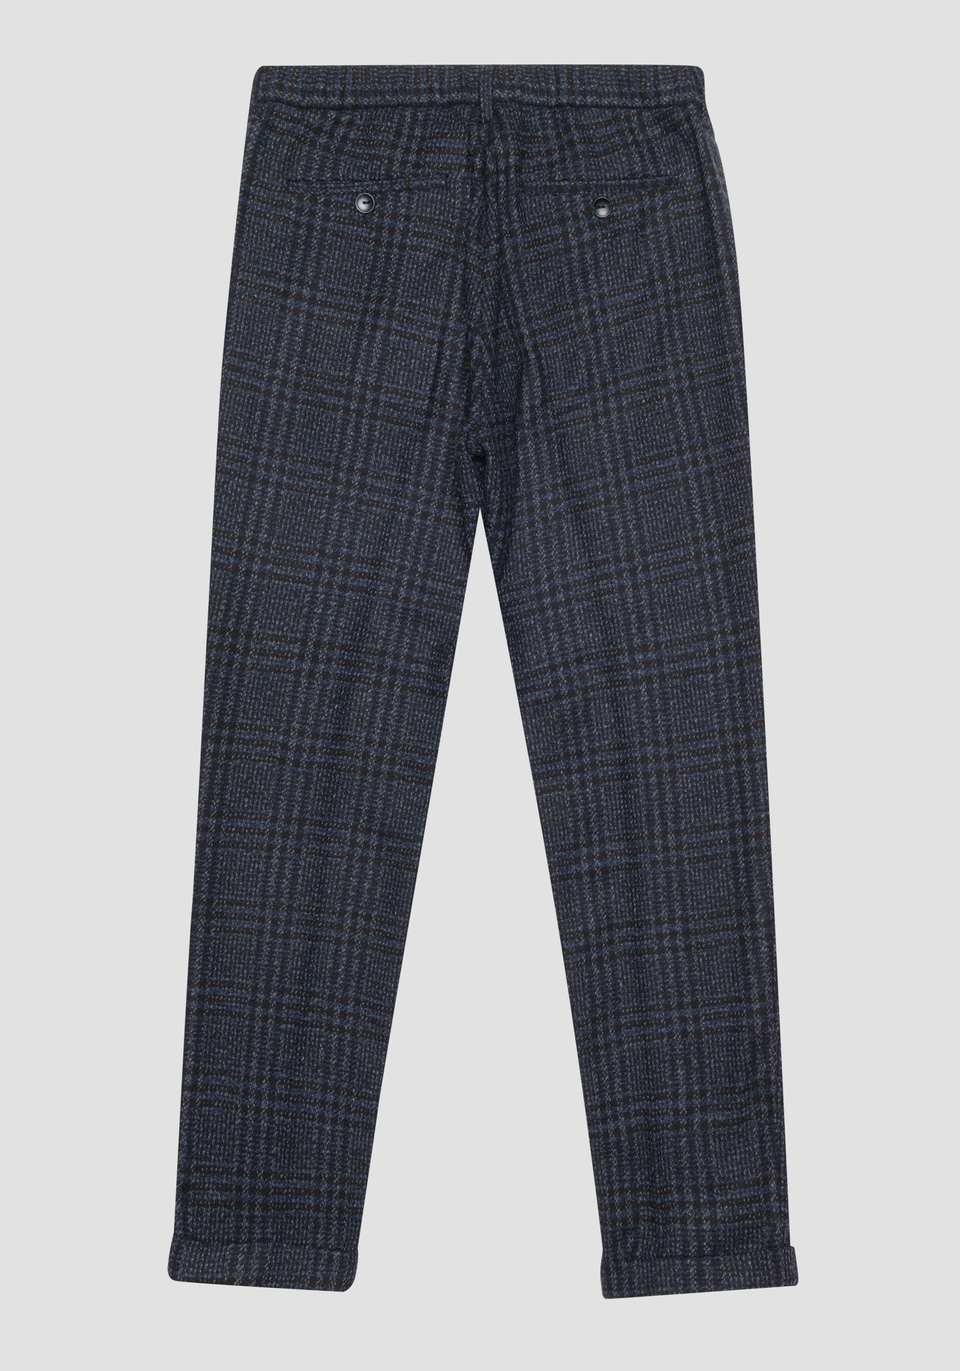 "GUSTAF" CARROT FIT TROUSERS IN WOOL BLEND WITH PRINCE OF WALES PATTERN - Antony Morato Online Shop